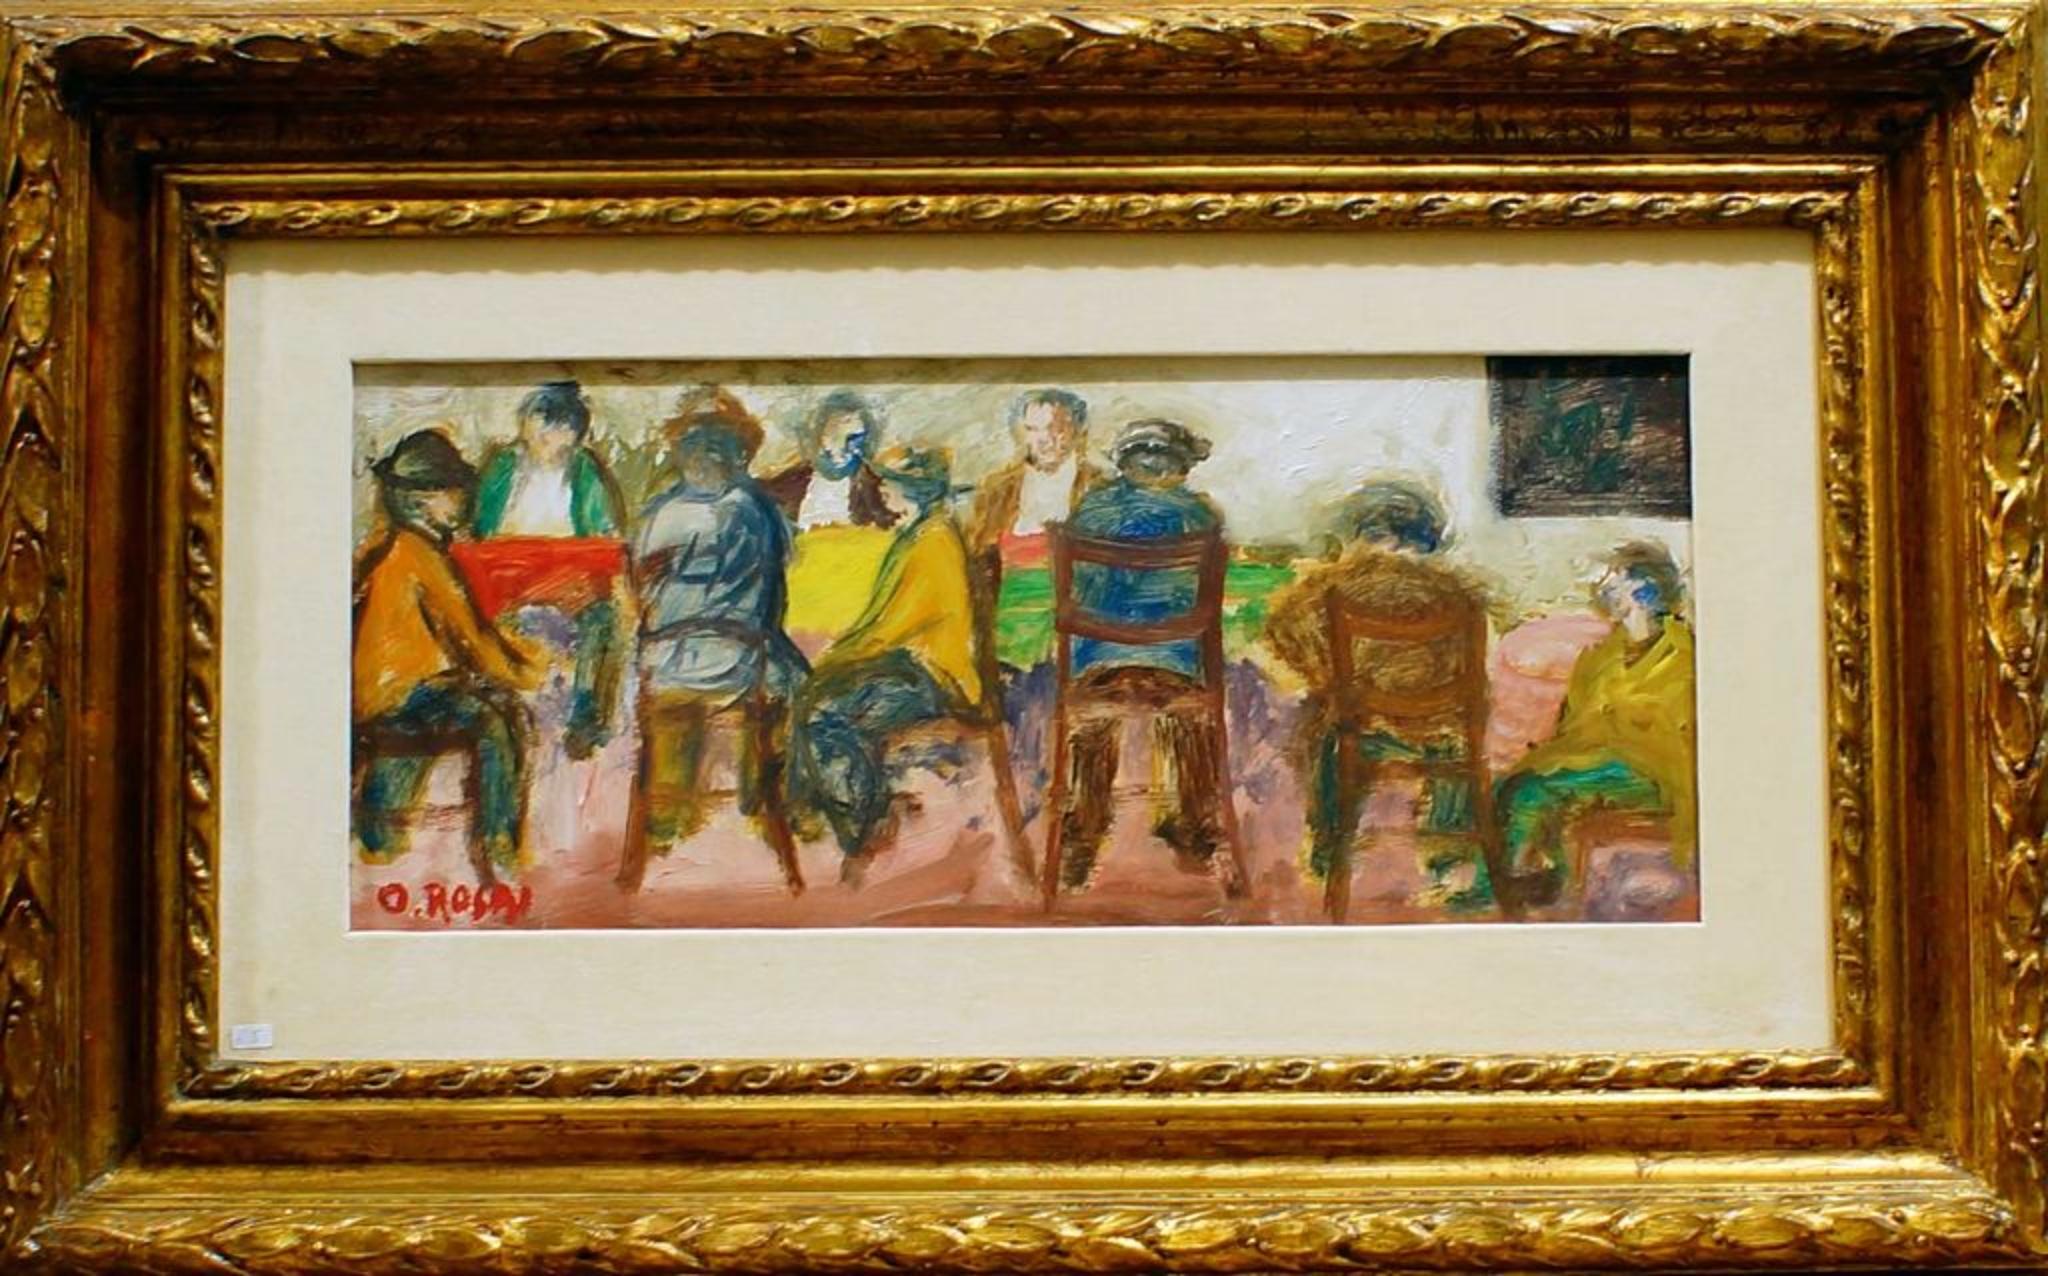 Men at the Cafè - Oil Paint on Plywood by Ottone Rosai - 1956